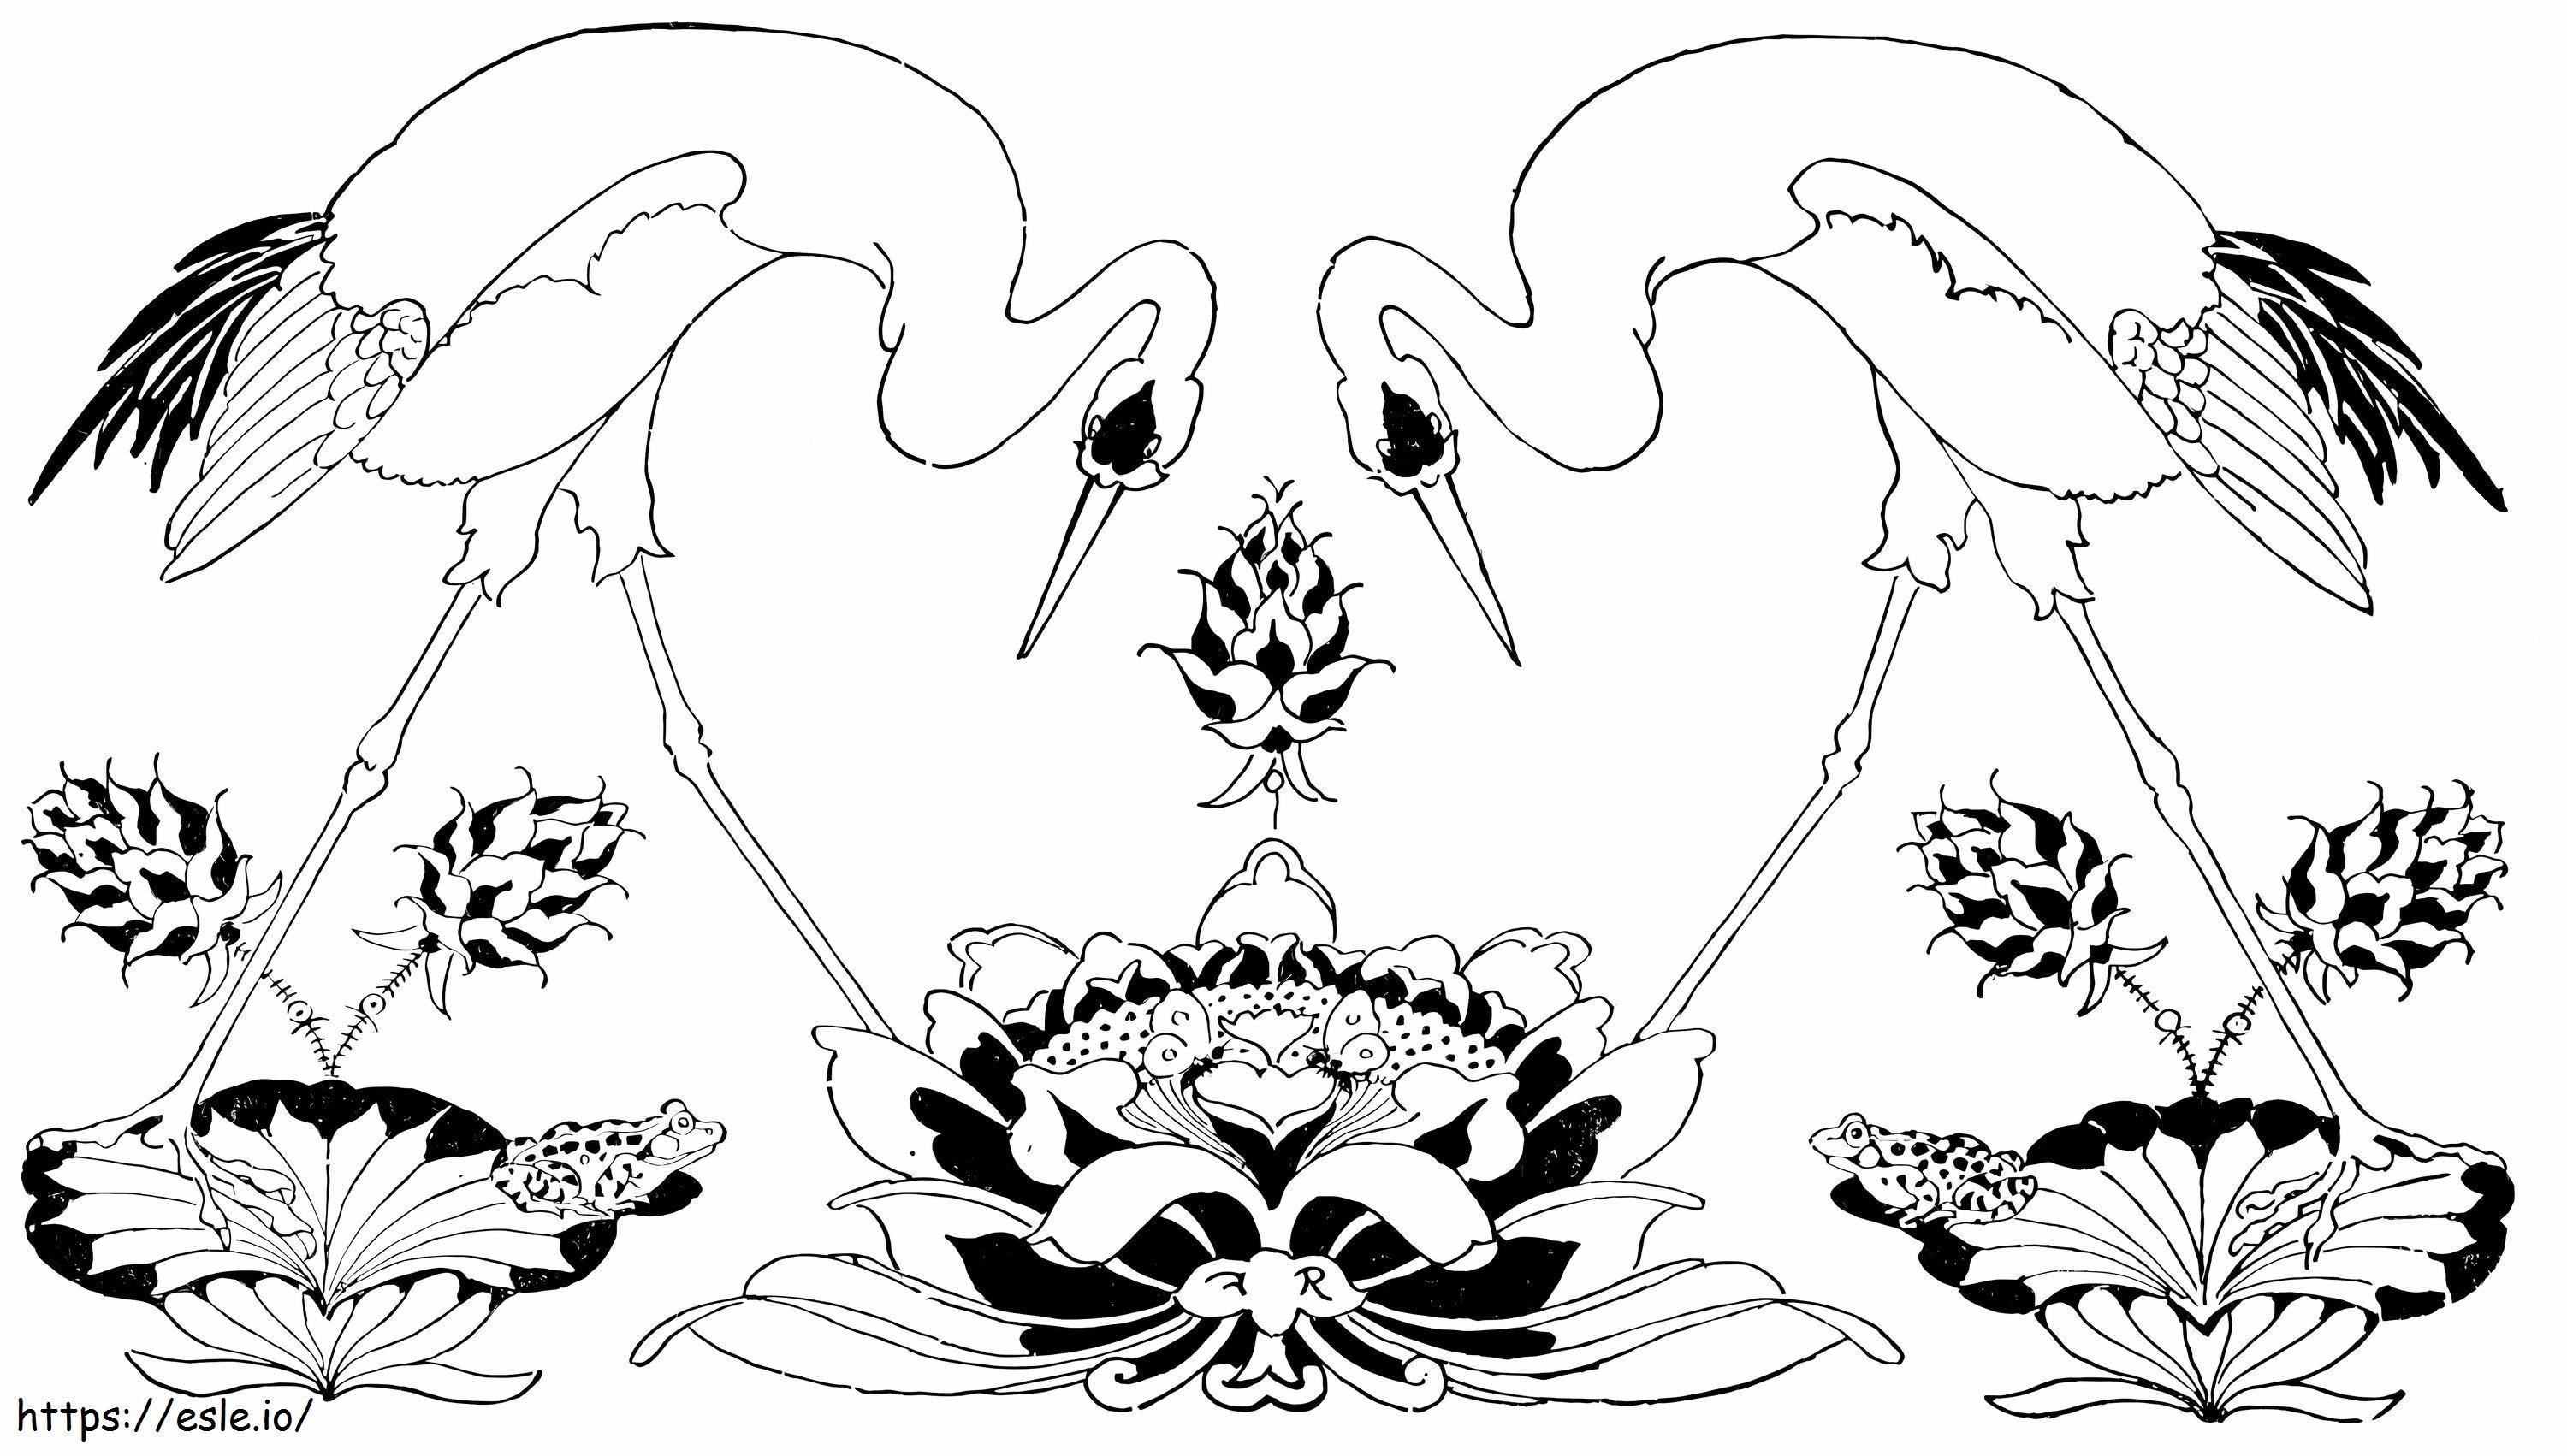 Egrets And Flower coloring page